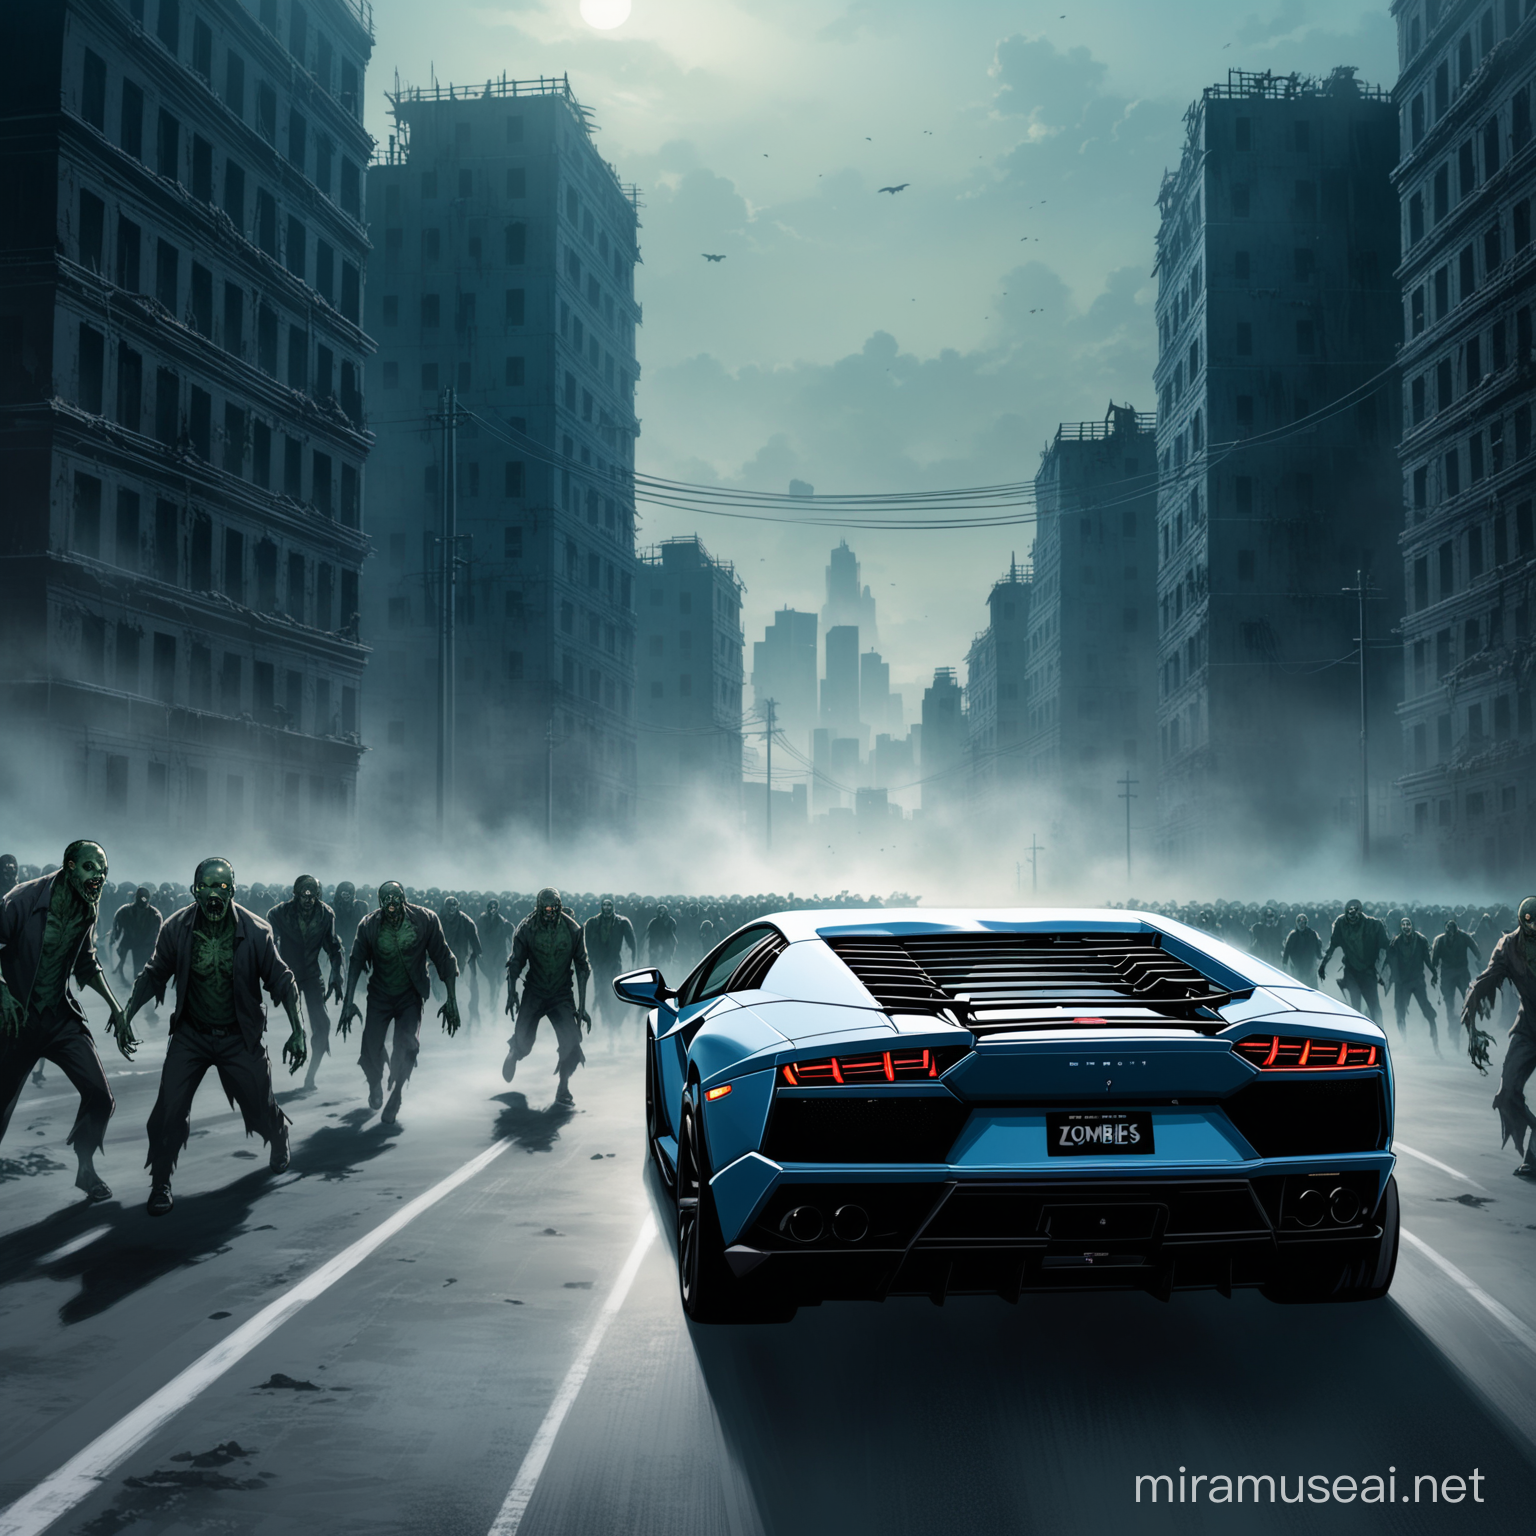 in front of the image should be dark blue lamborghini from its back view shows how it runs over, zombies at the background of the image with biuldings behaind the zombies